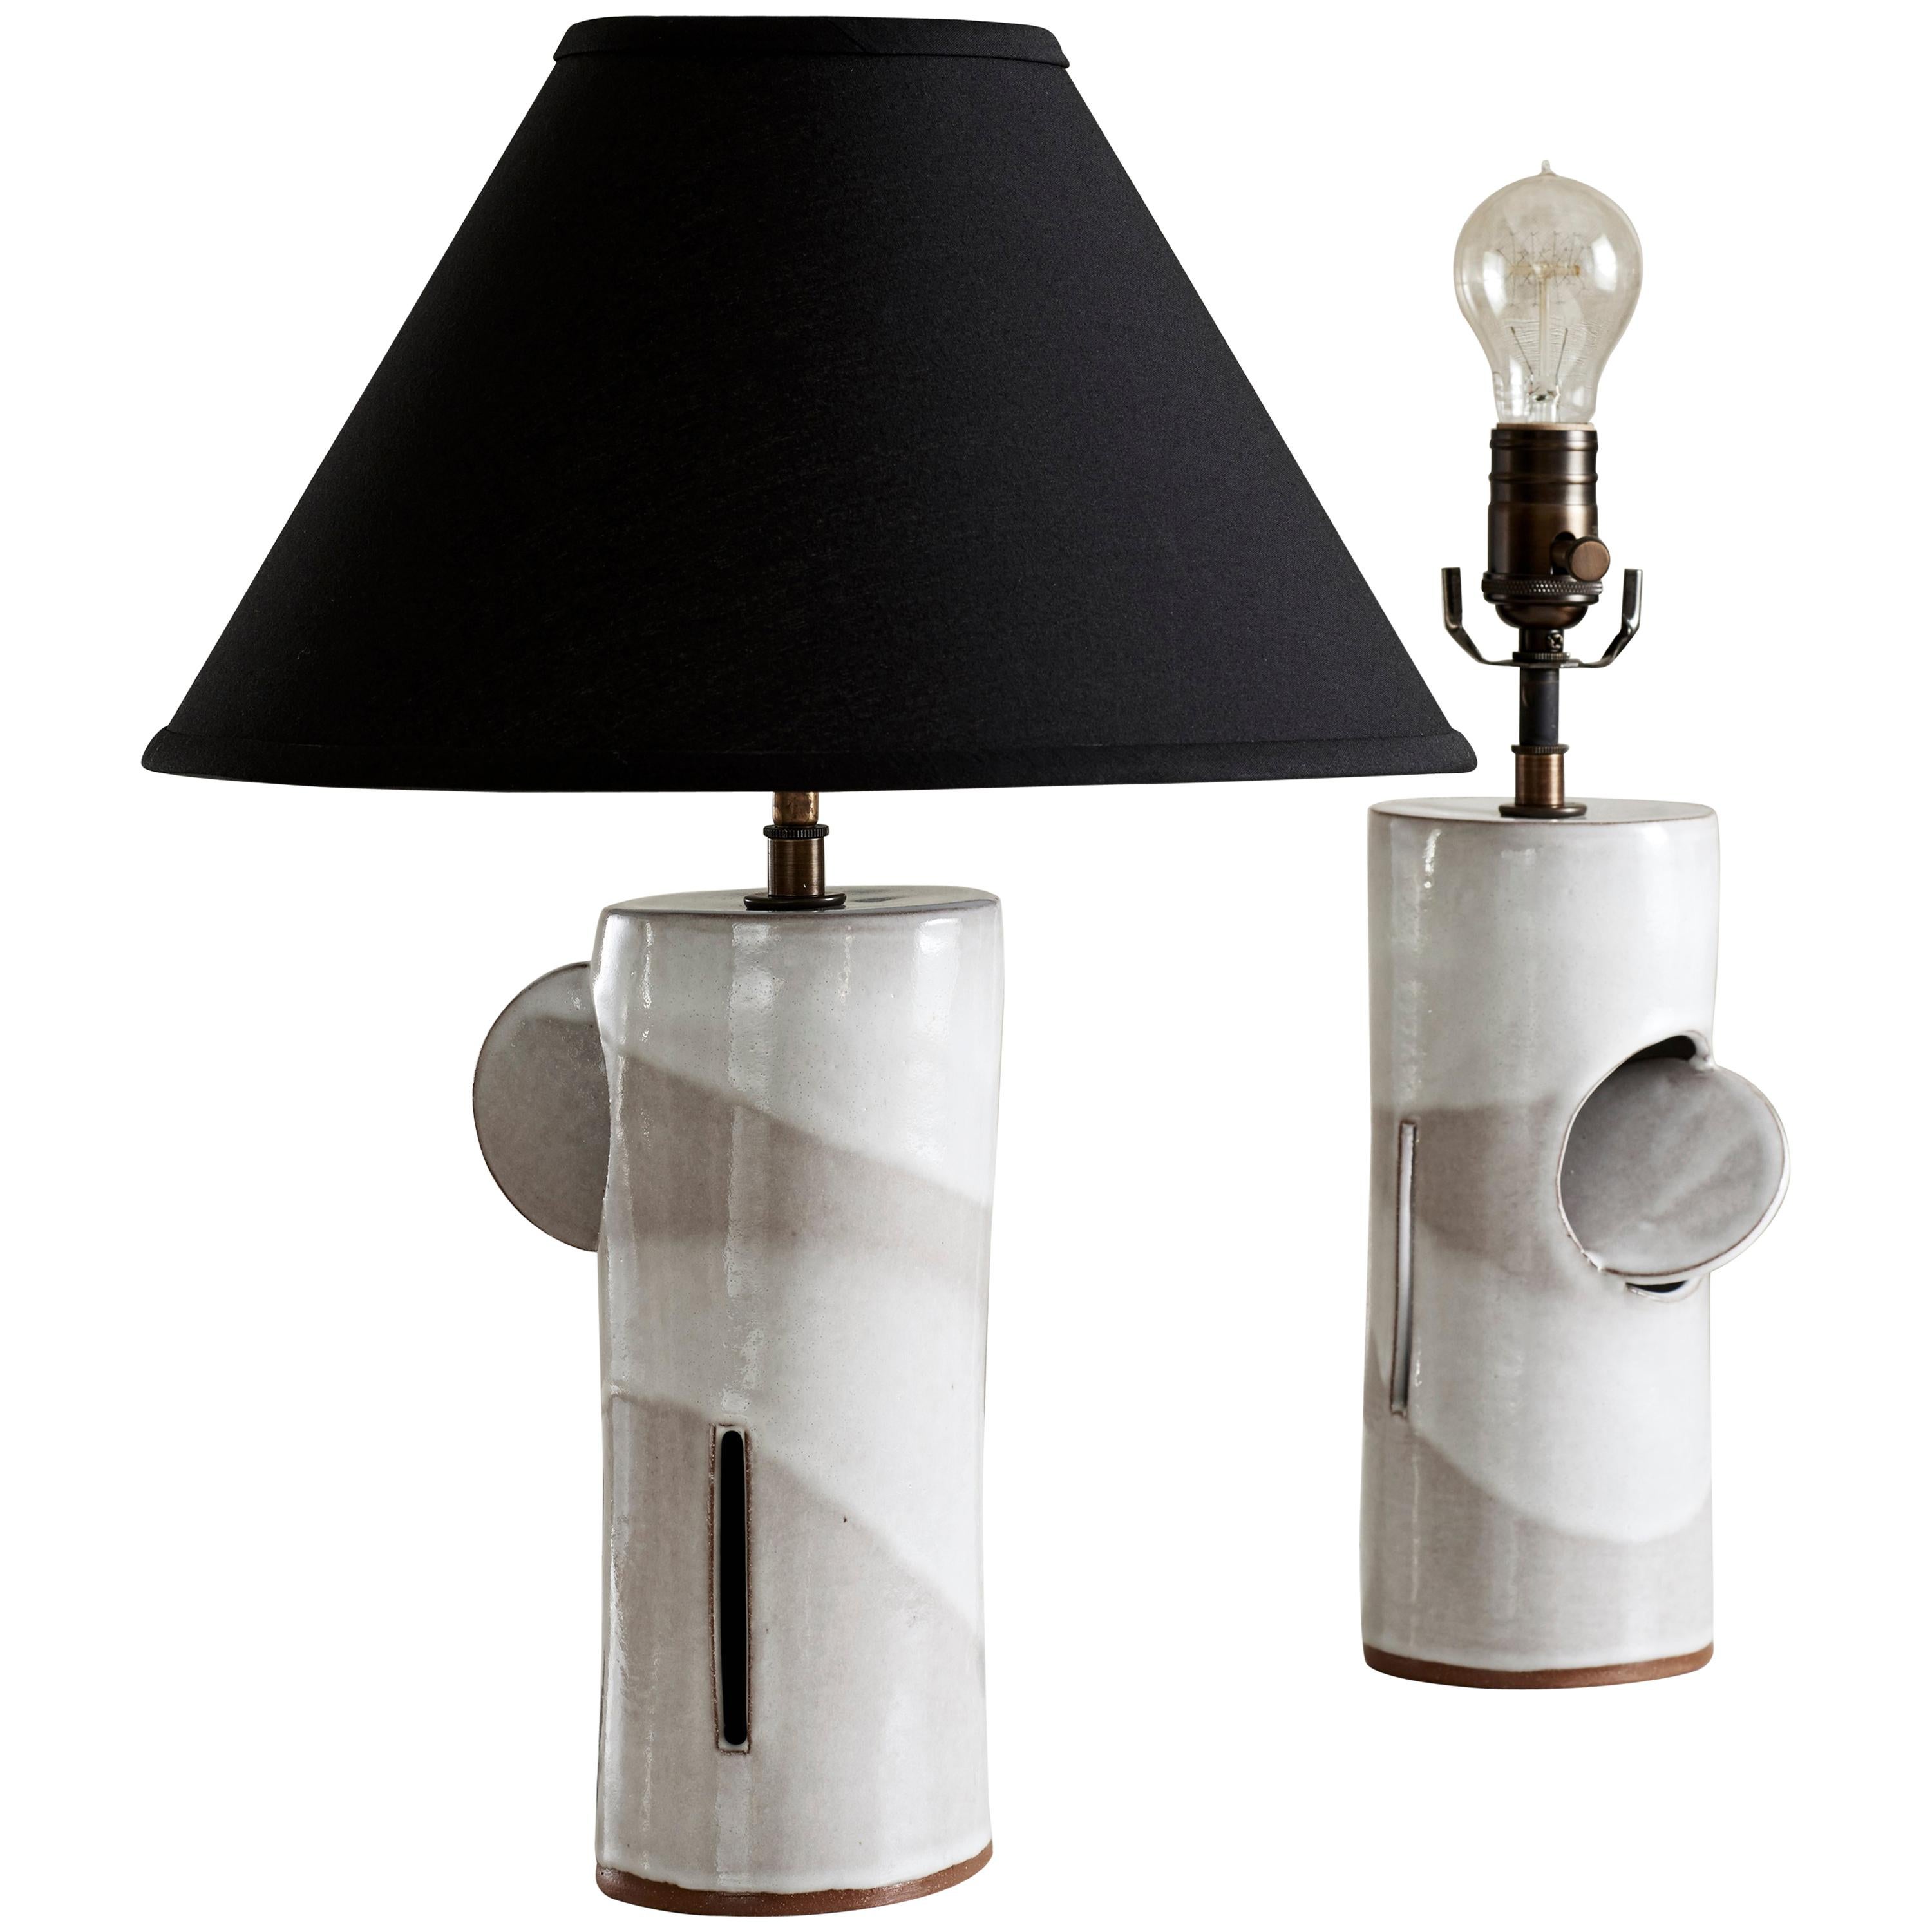 Sherald Lamp, Ceramic Sculptural Table Lamp by Dumais Made